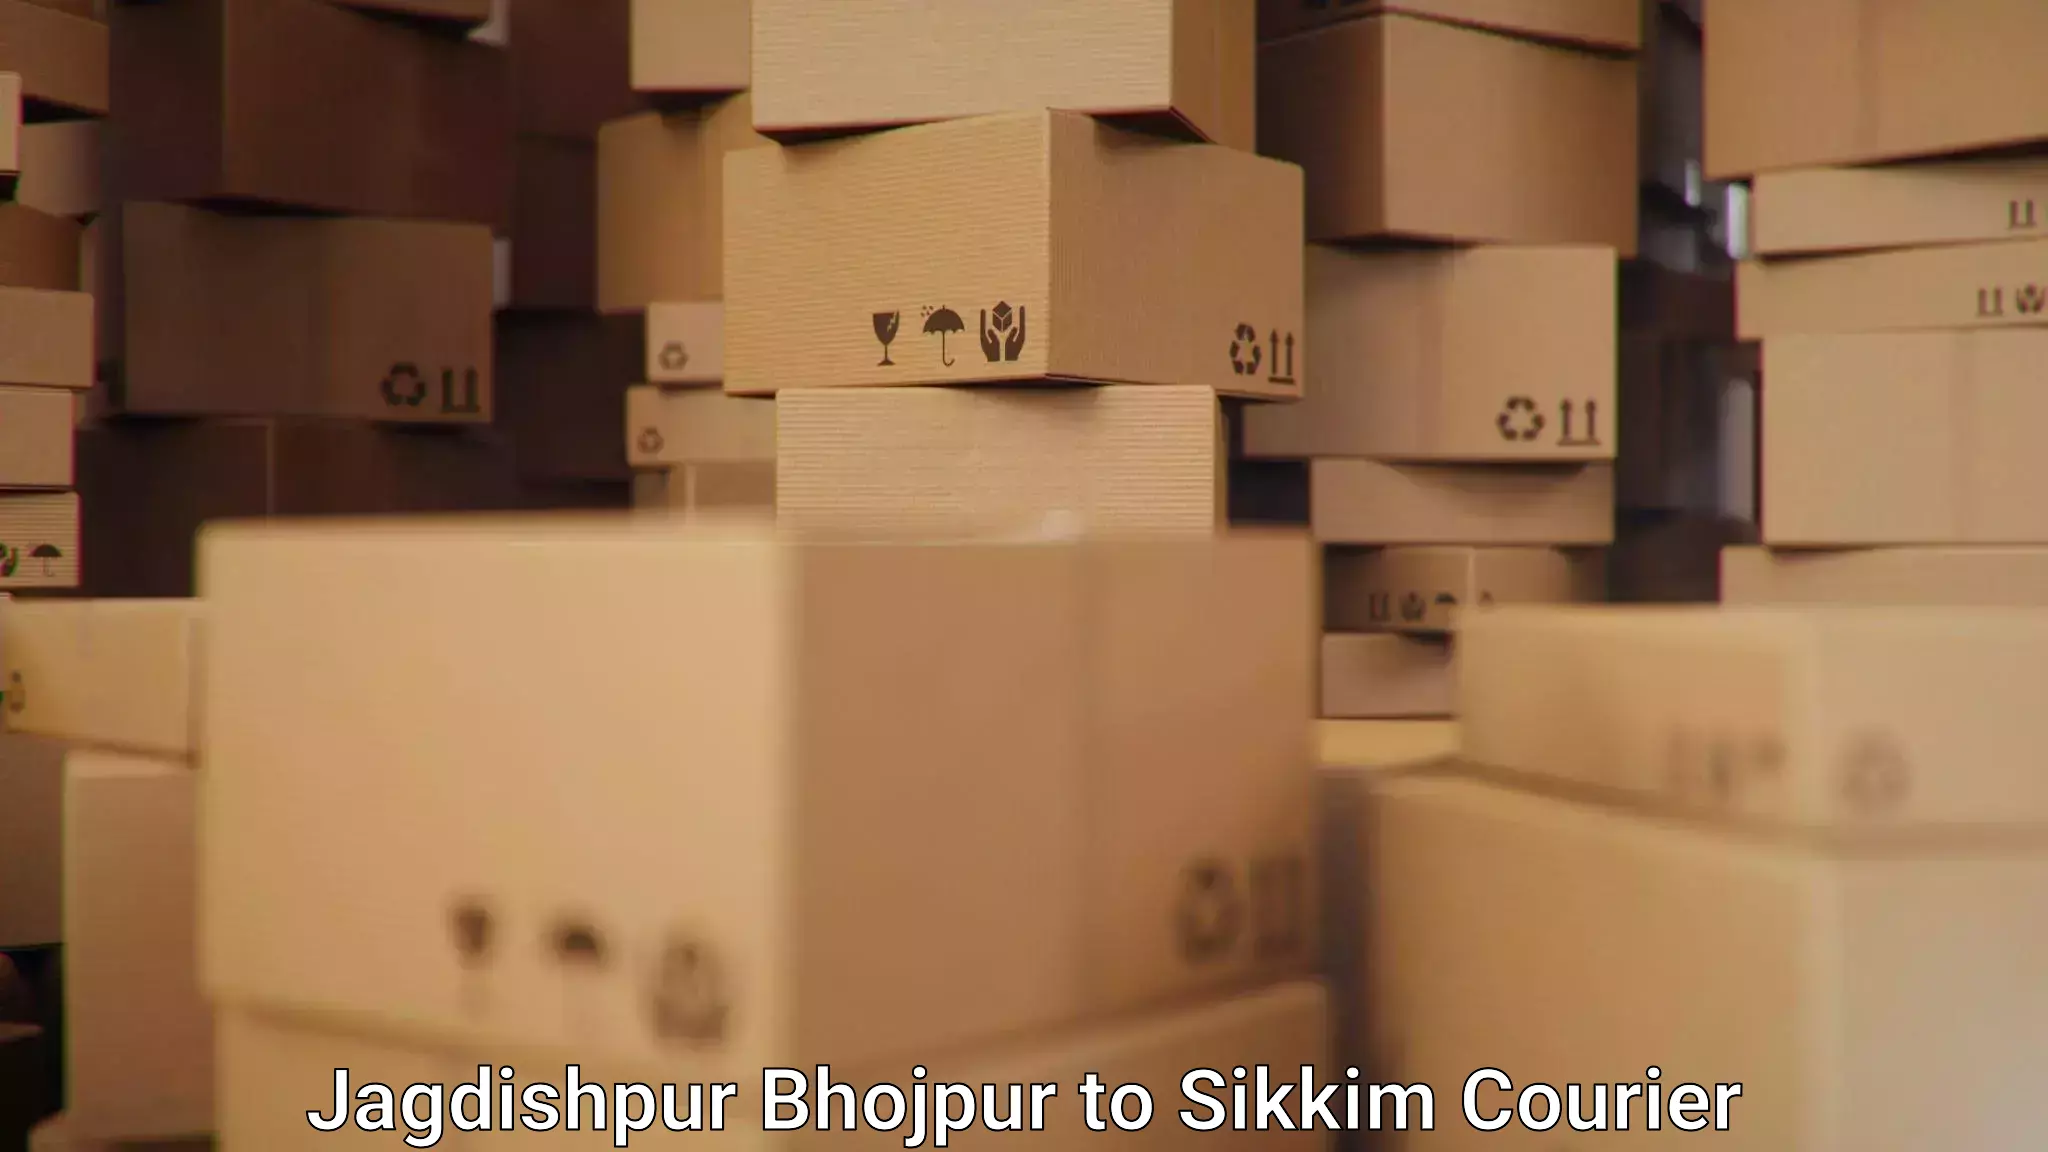 Secure freight services Jagdishpur Bhojpur to East Sikkim